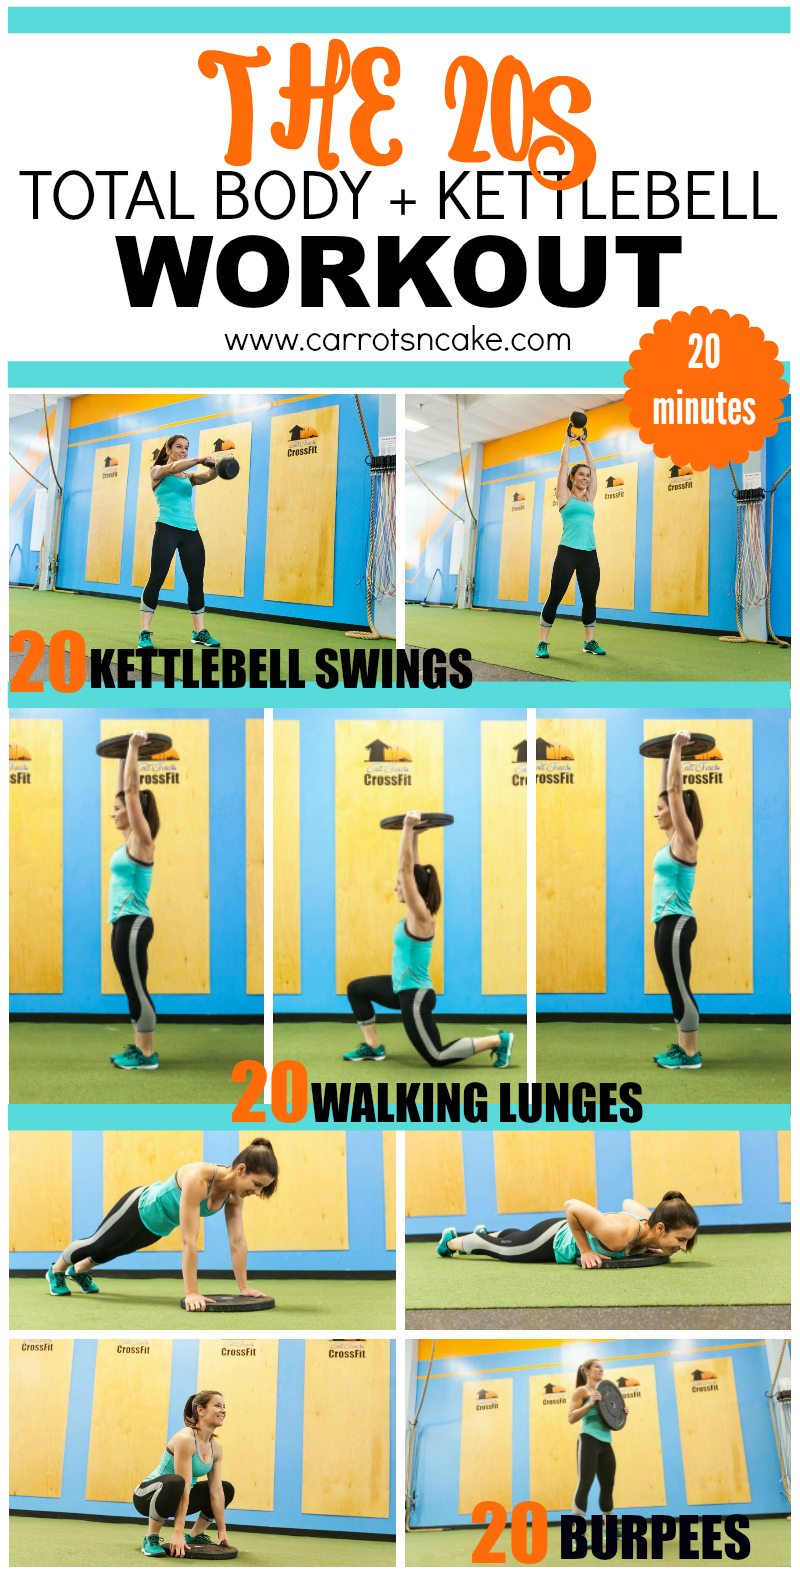 the-20s-total-body-kettlebell-workout